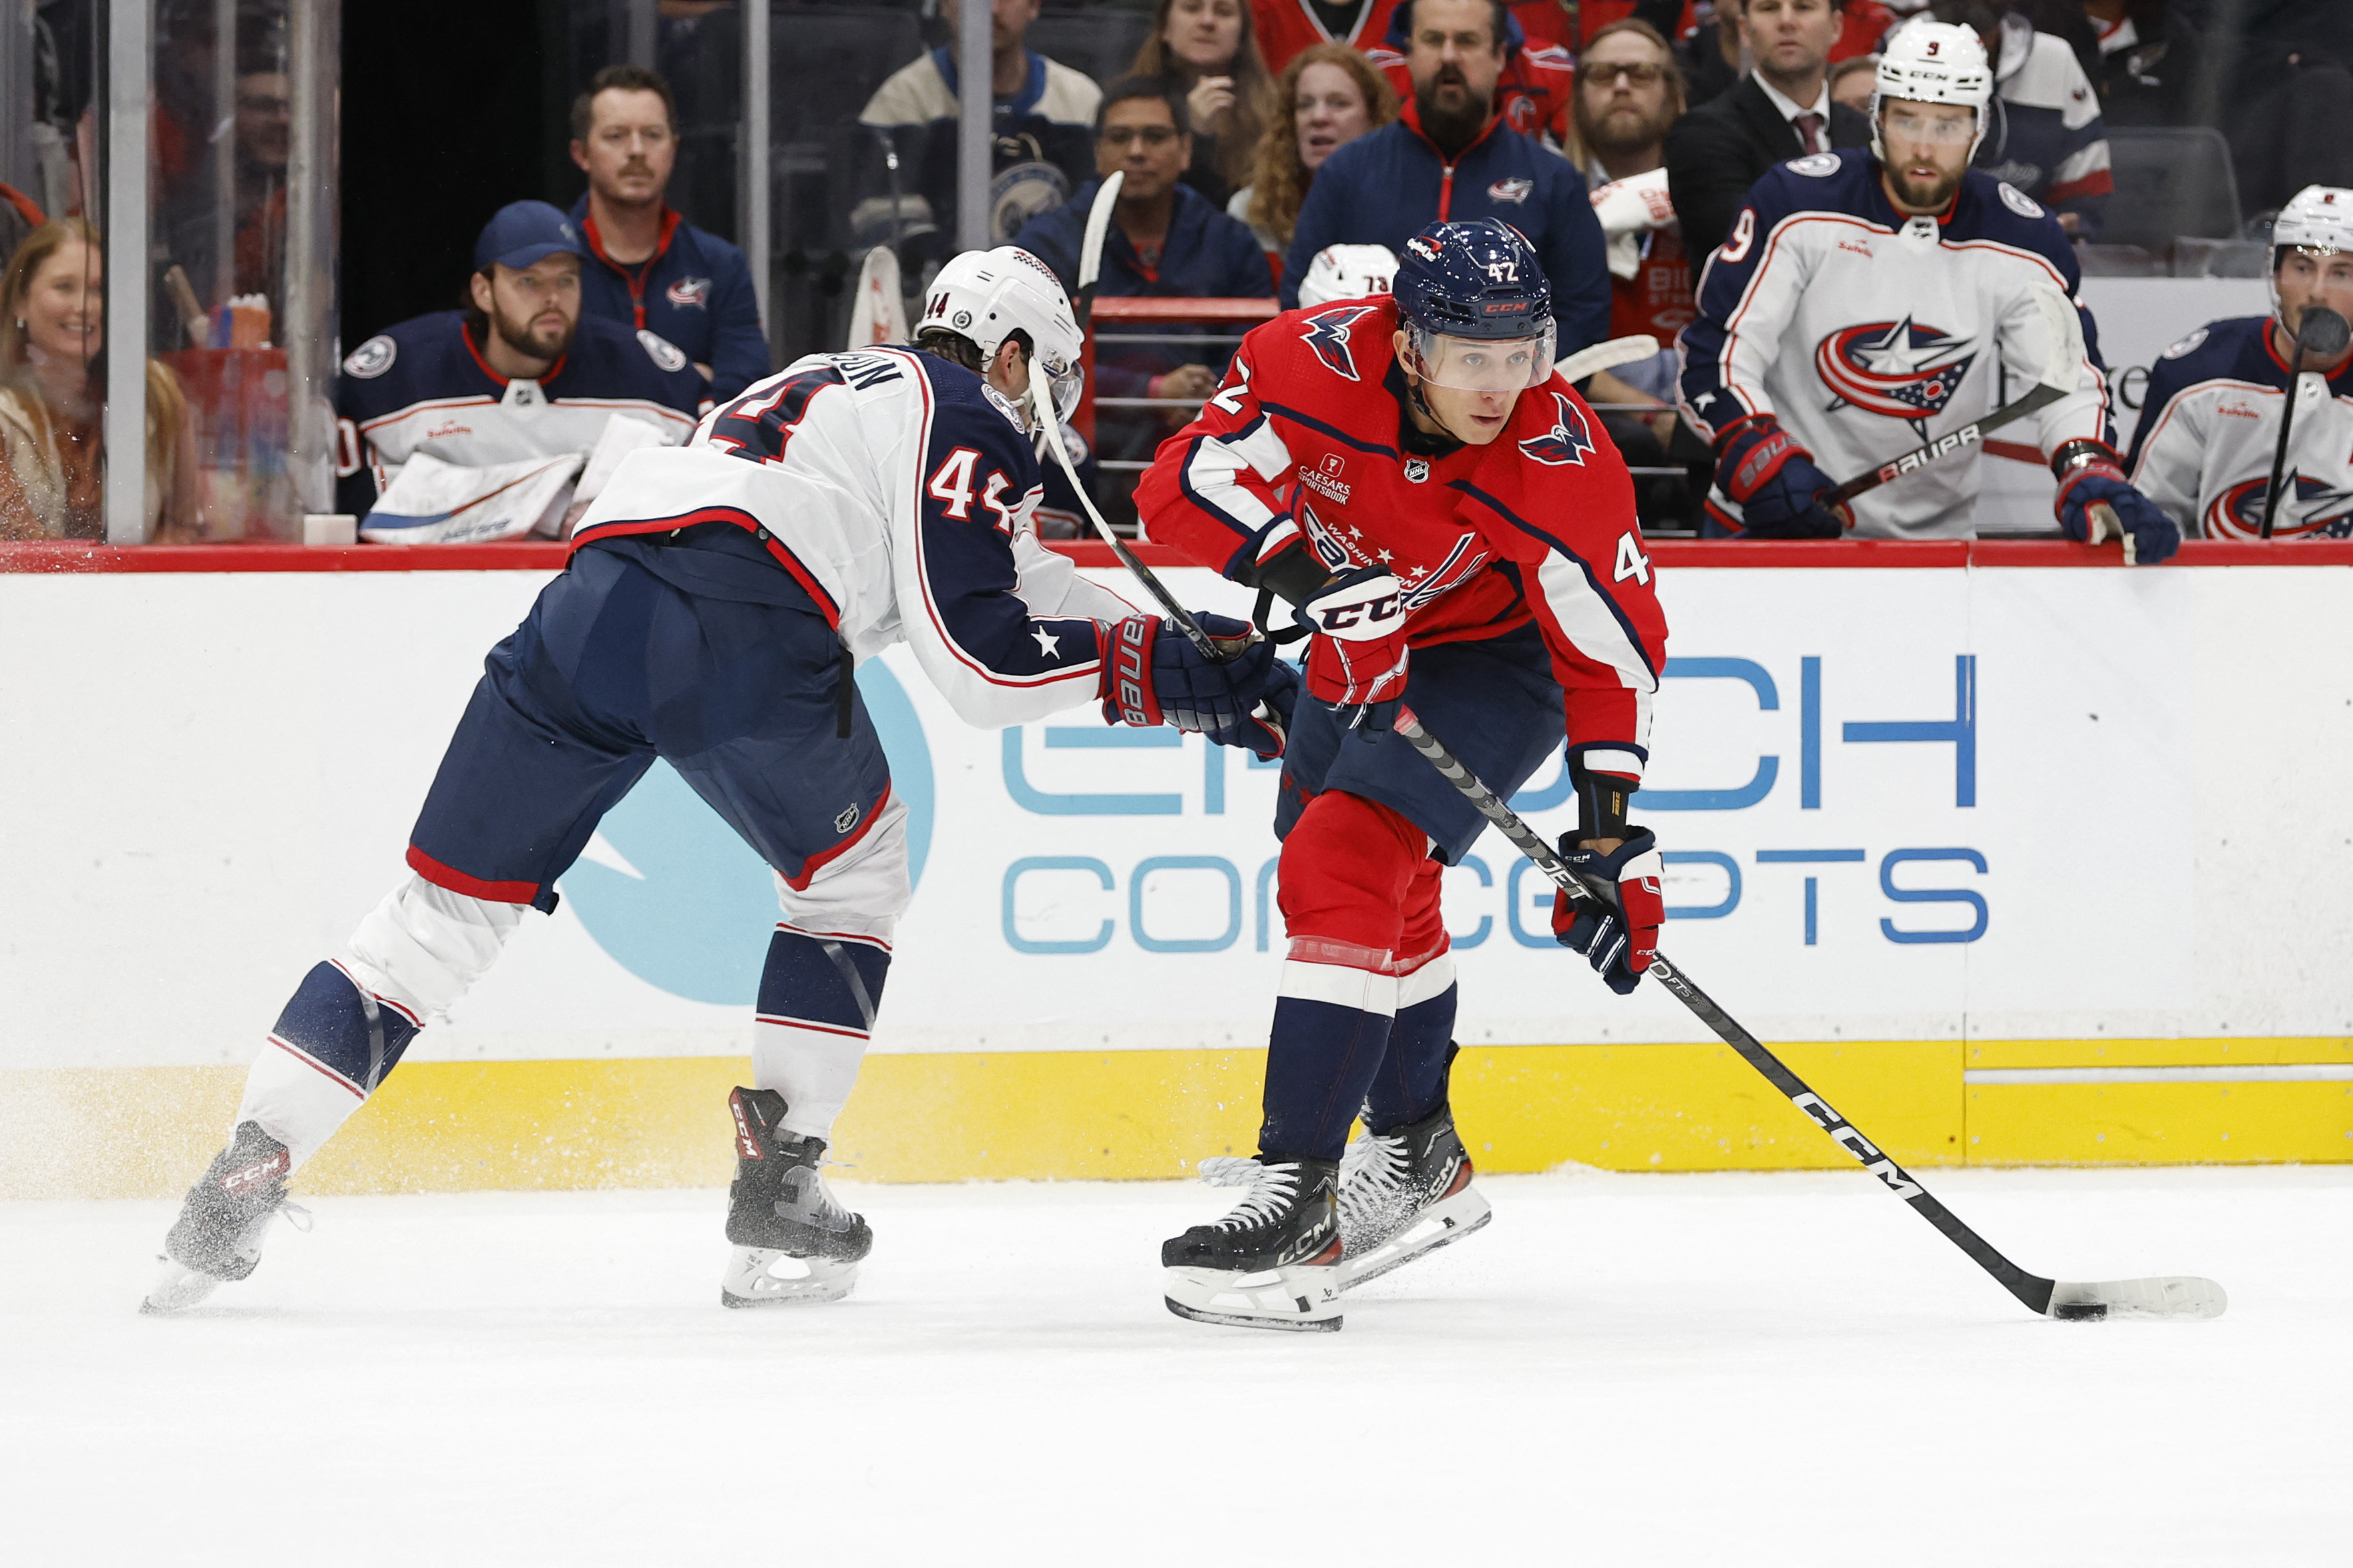 Early goals stand up as Caps clip Blue Jackets | Reuters